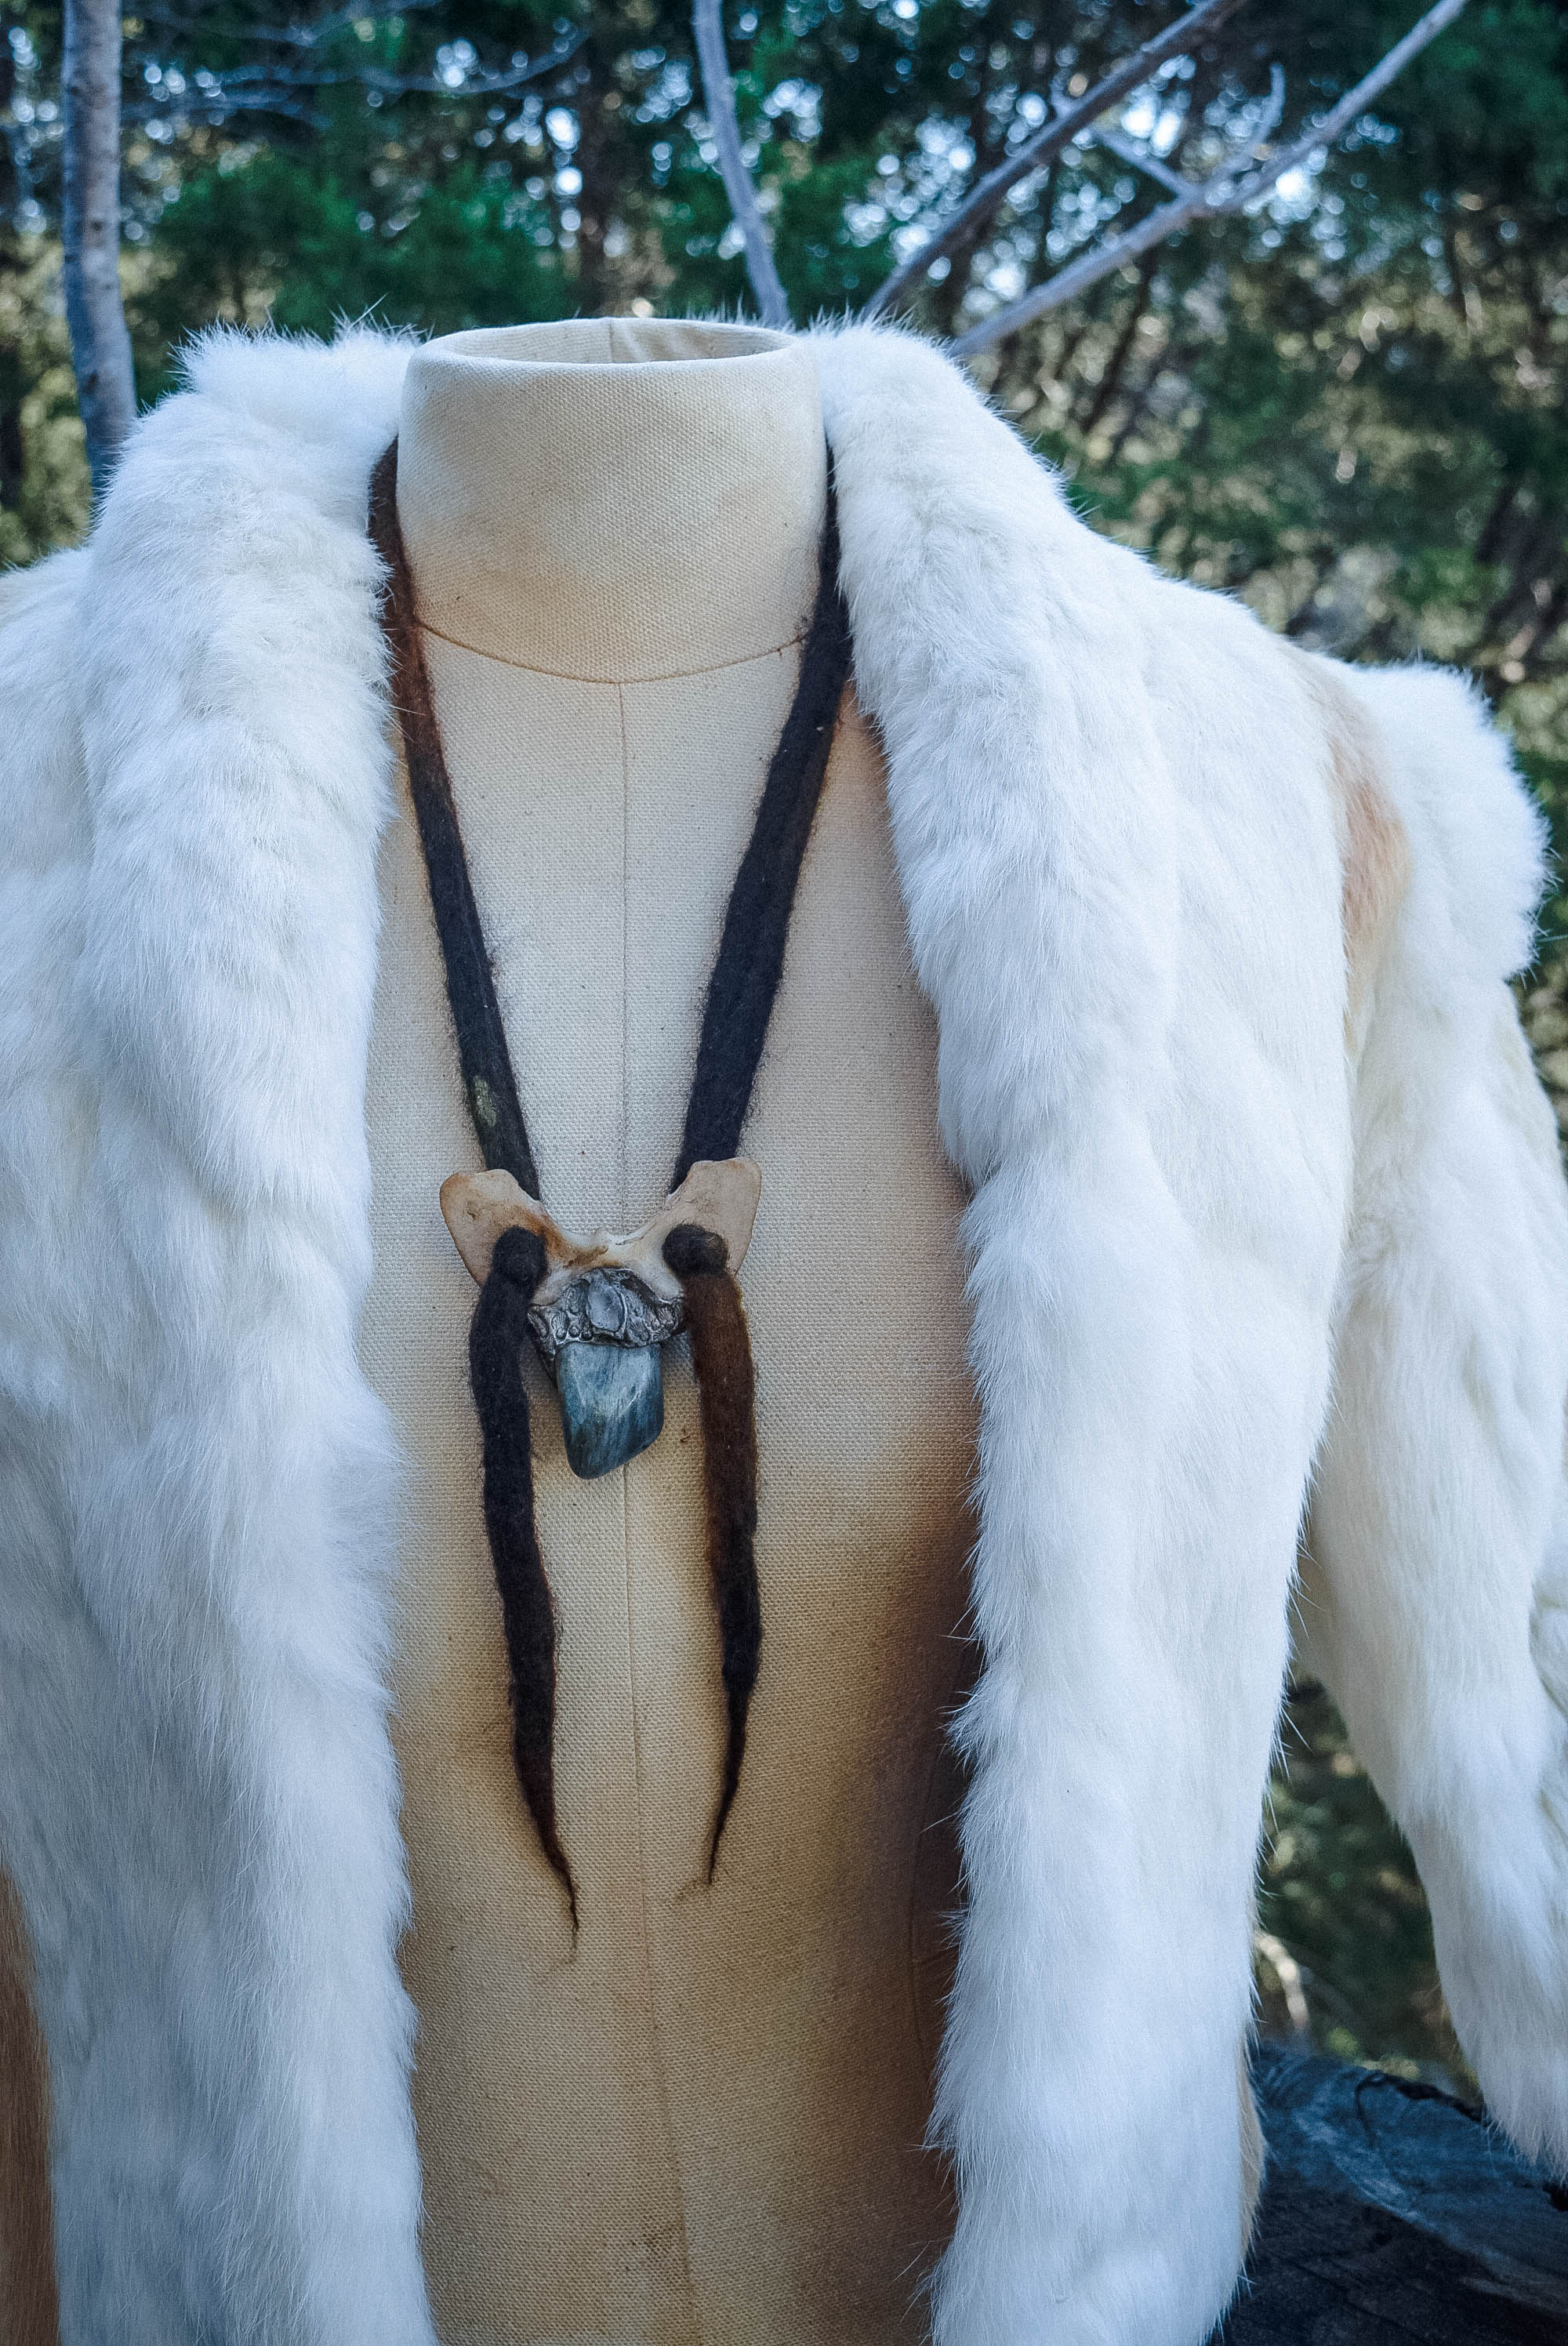 Wild Creatrix Necklace for Fierce Creativity and Self Awareness